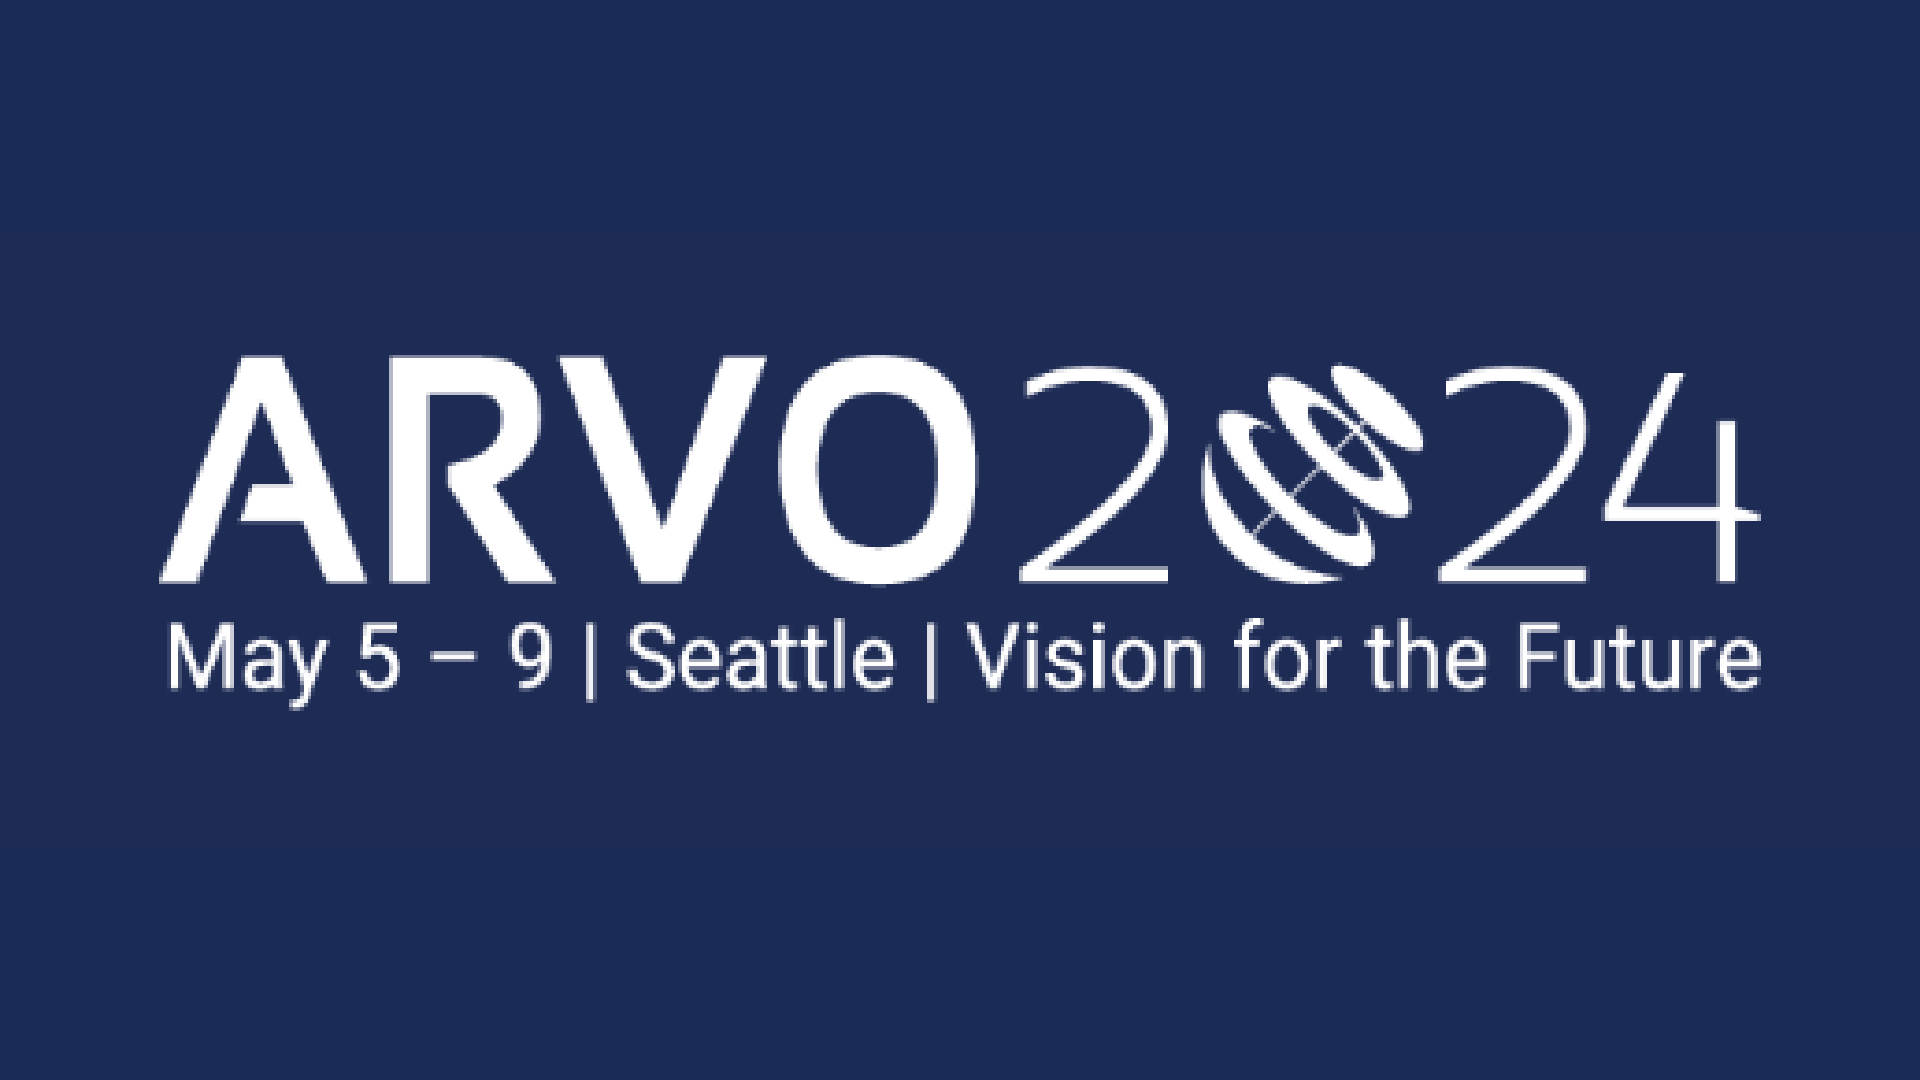 The Association for Research in Vision and Ophthalmology (ARVO